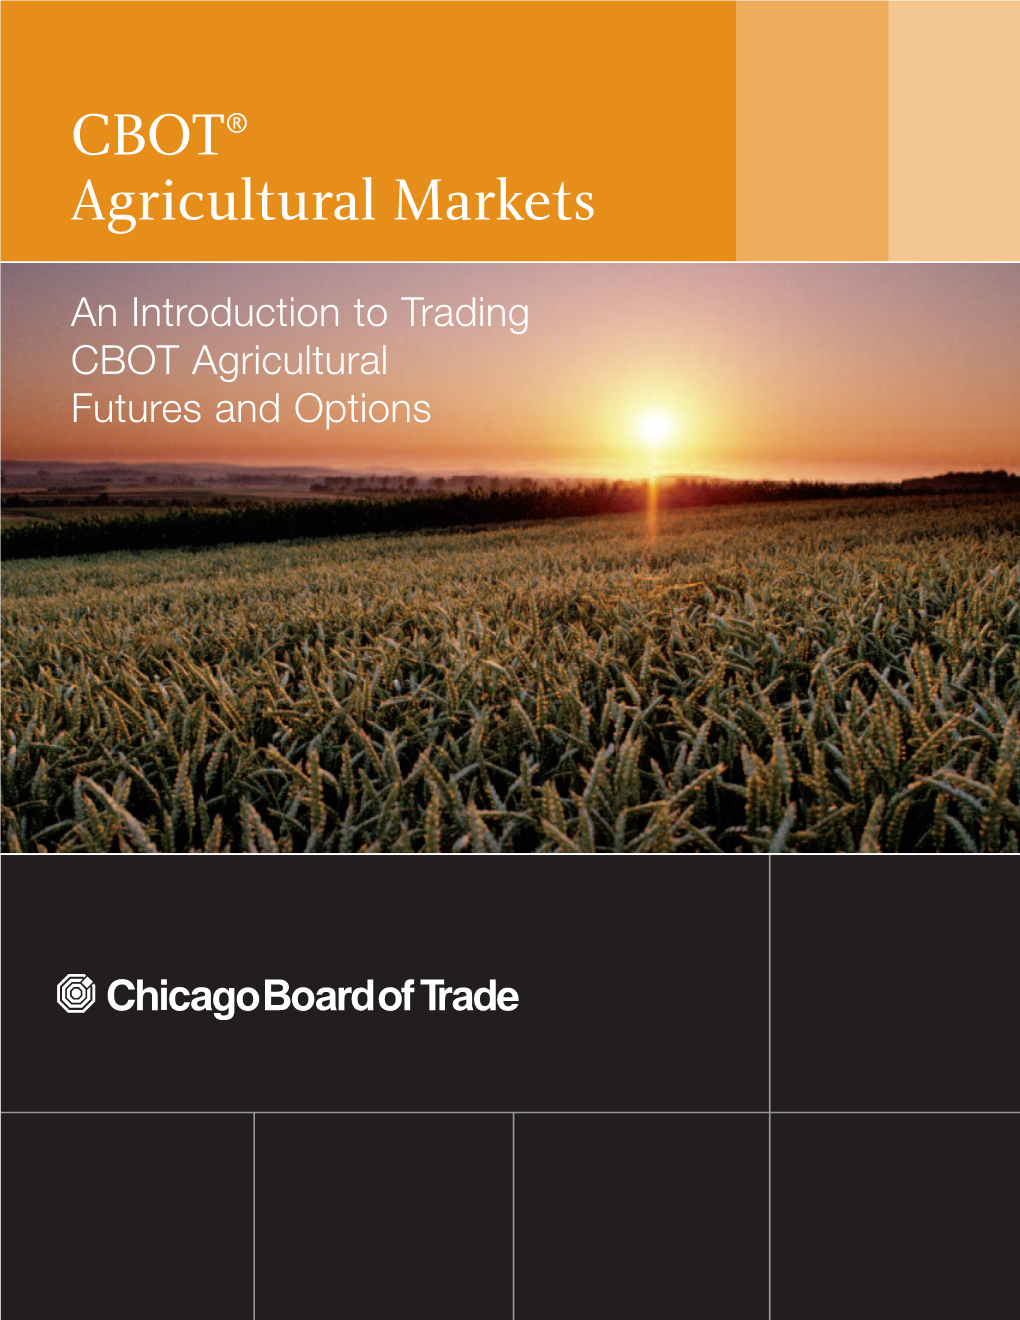 An Introduction to Trading CBOT Agricultural Futures and Options